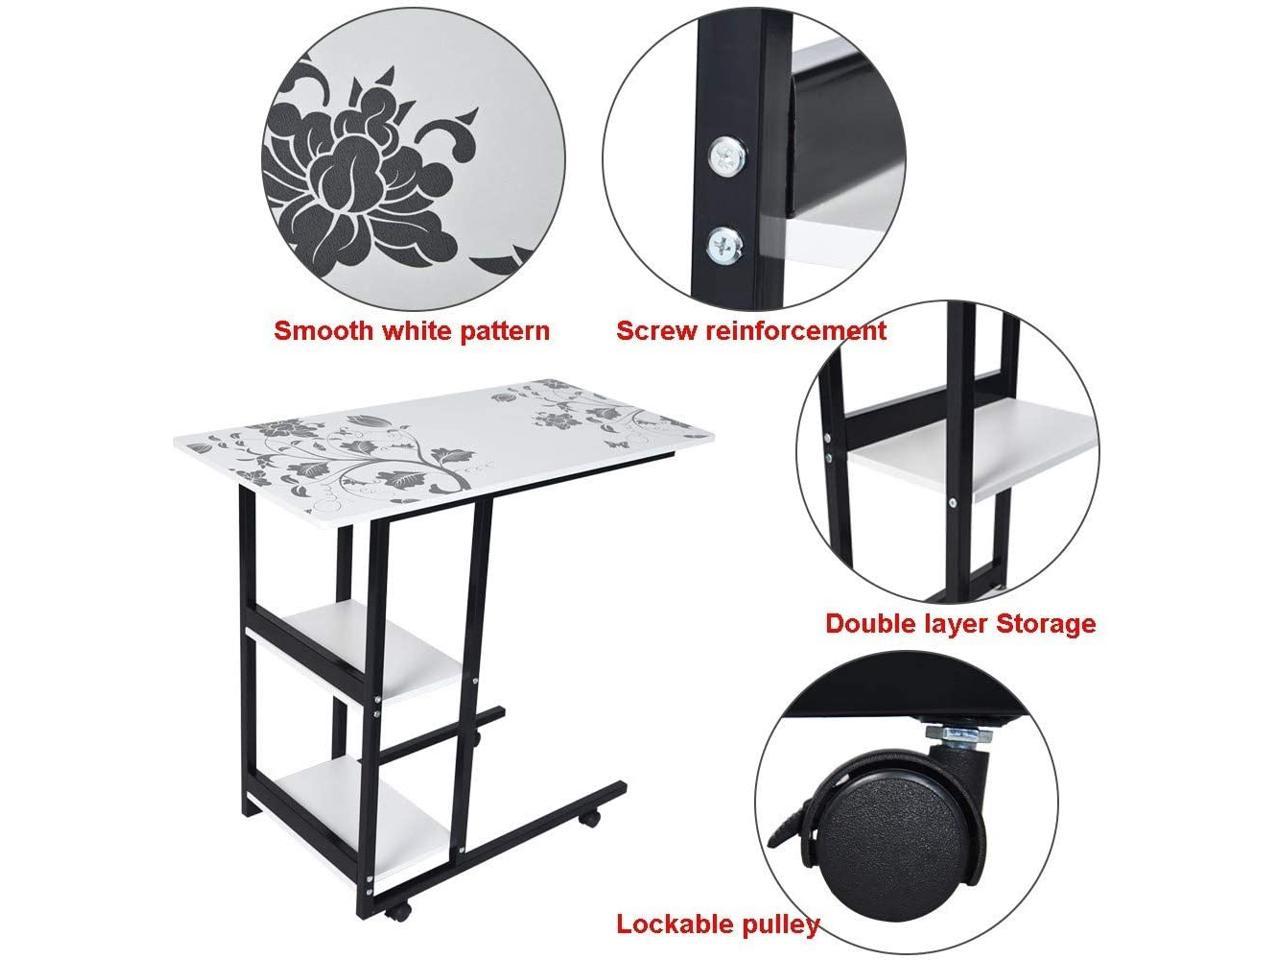 Fthome 3 Tier Portable End Table Coffee Table with Wheels, US Fast ... Portable Workstation On Wheels